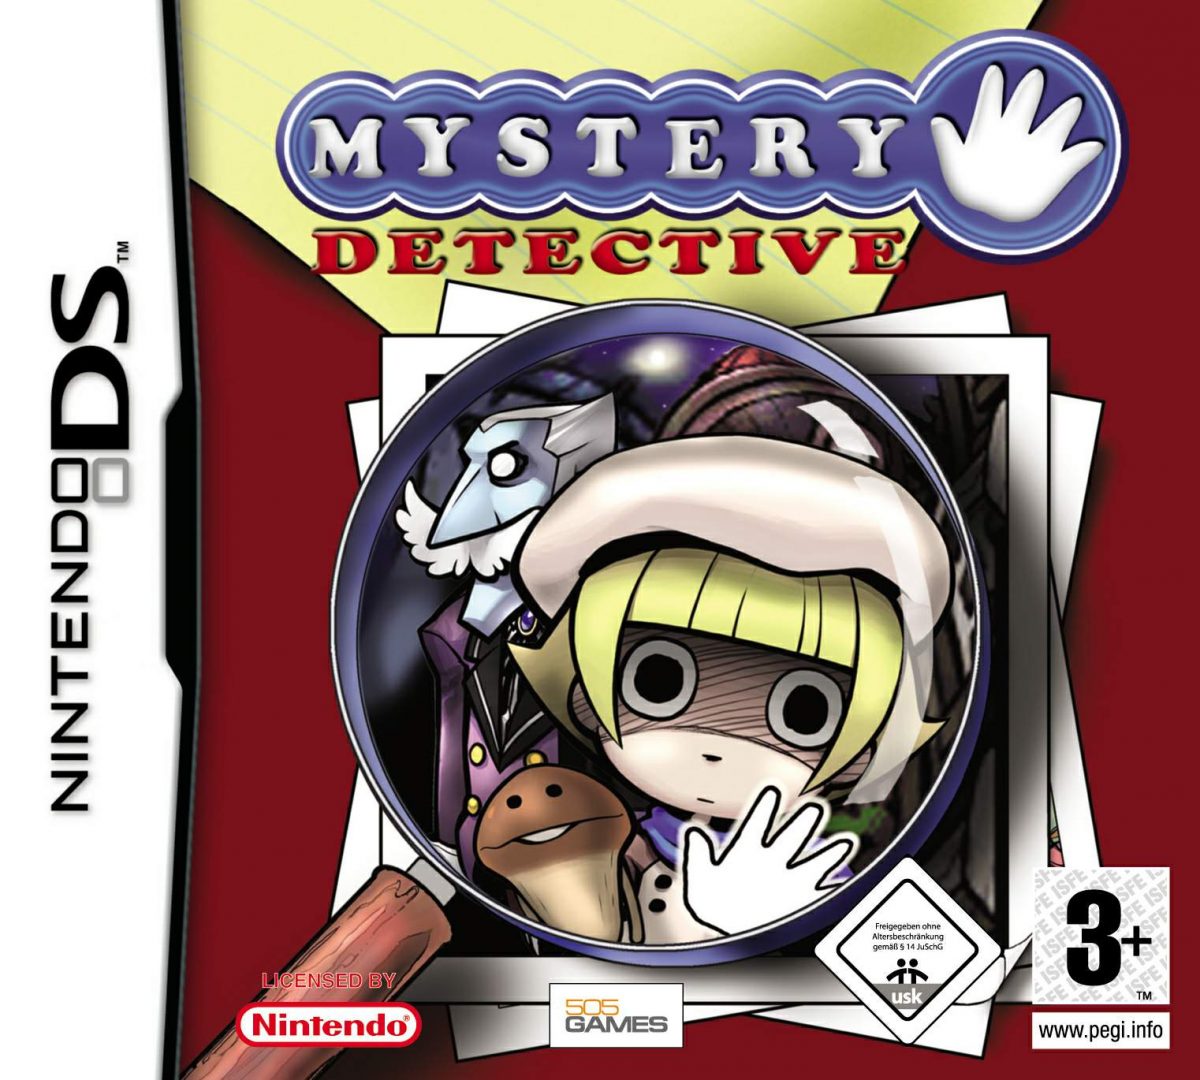 The coverart image of Mystery Detective 